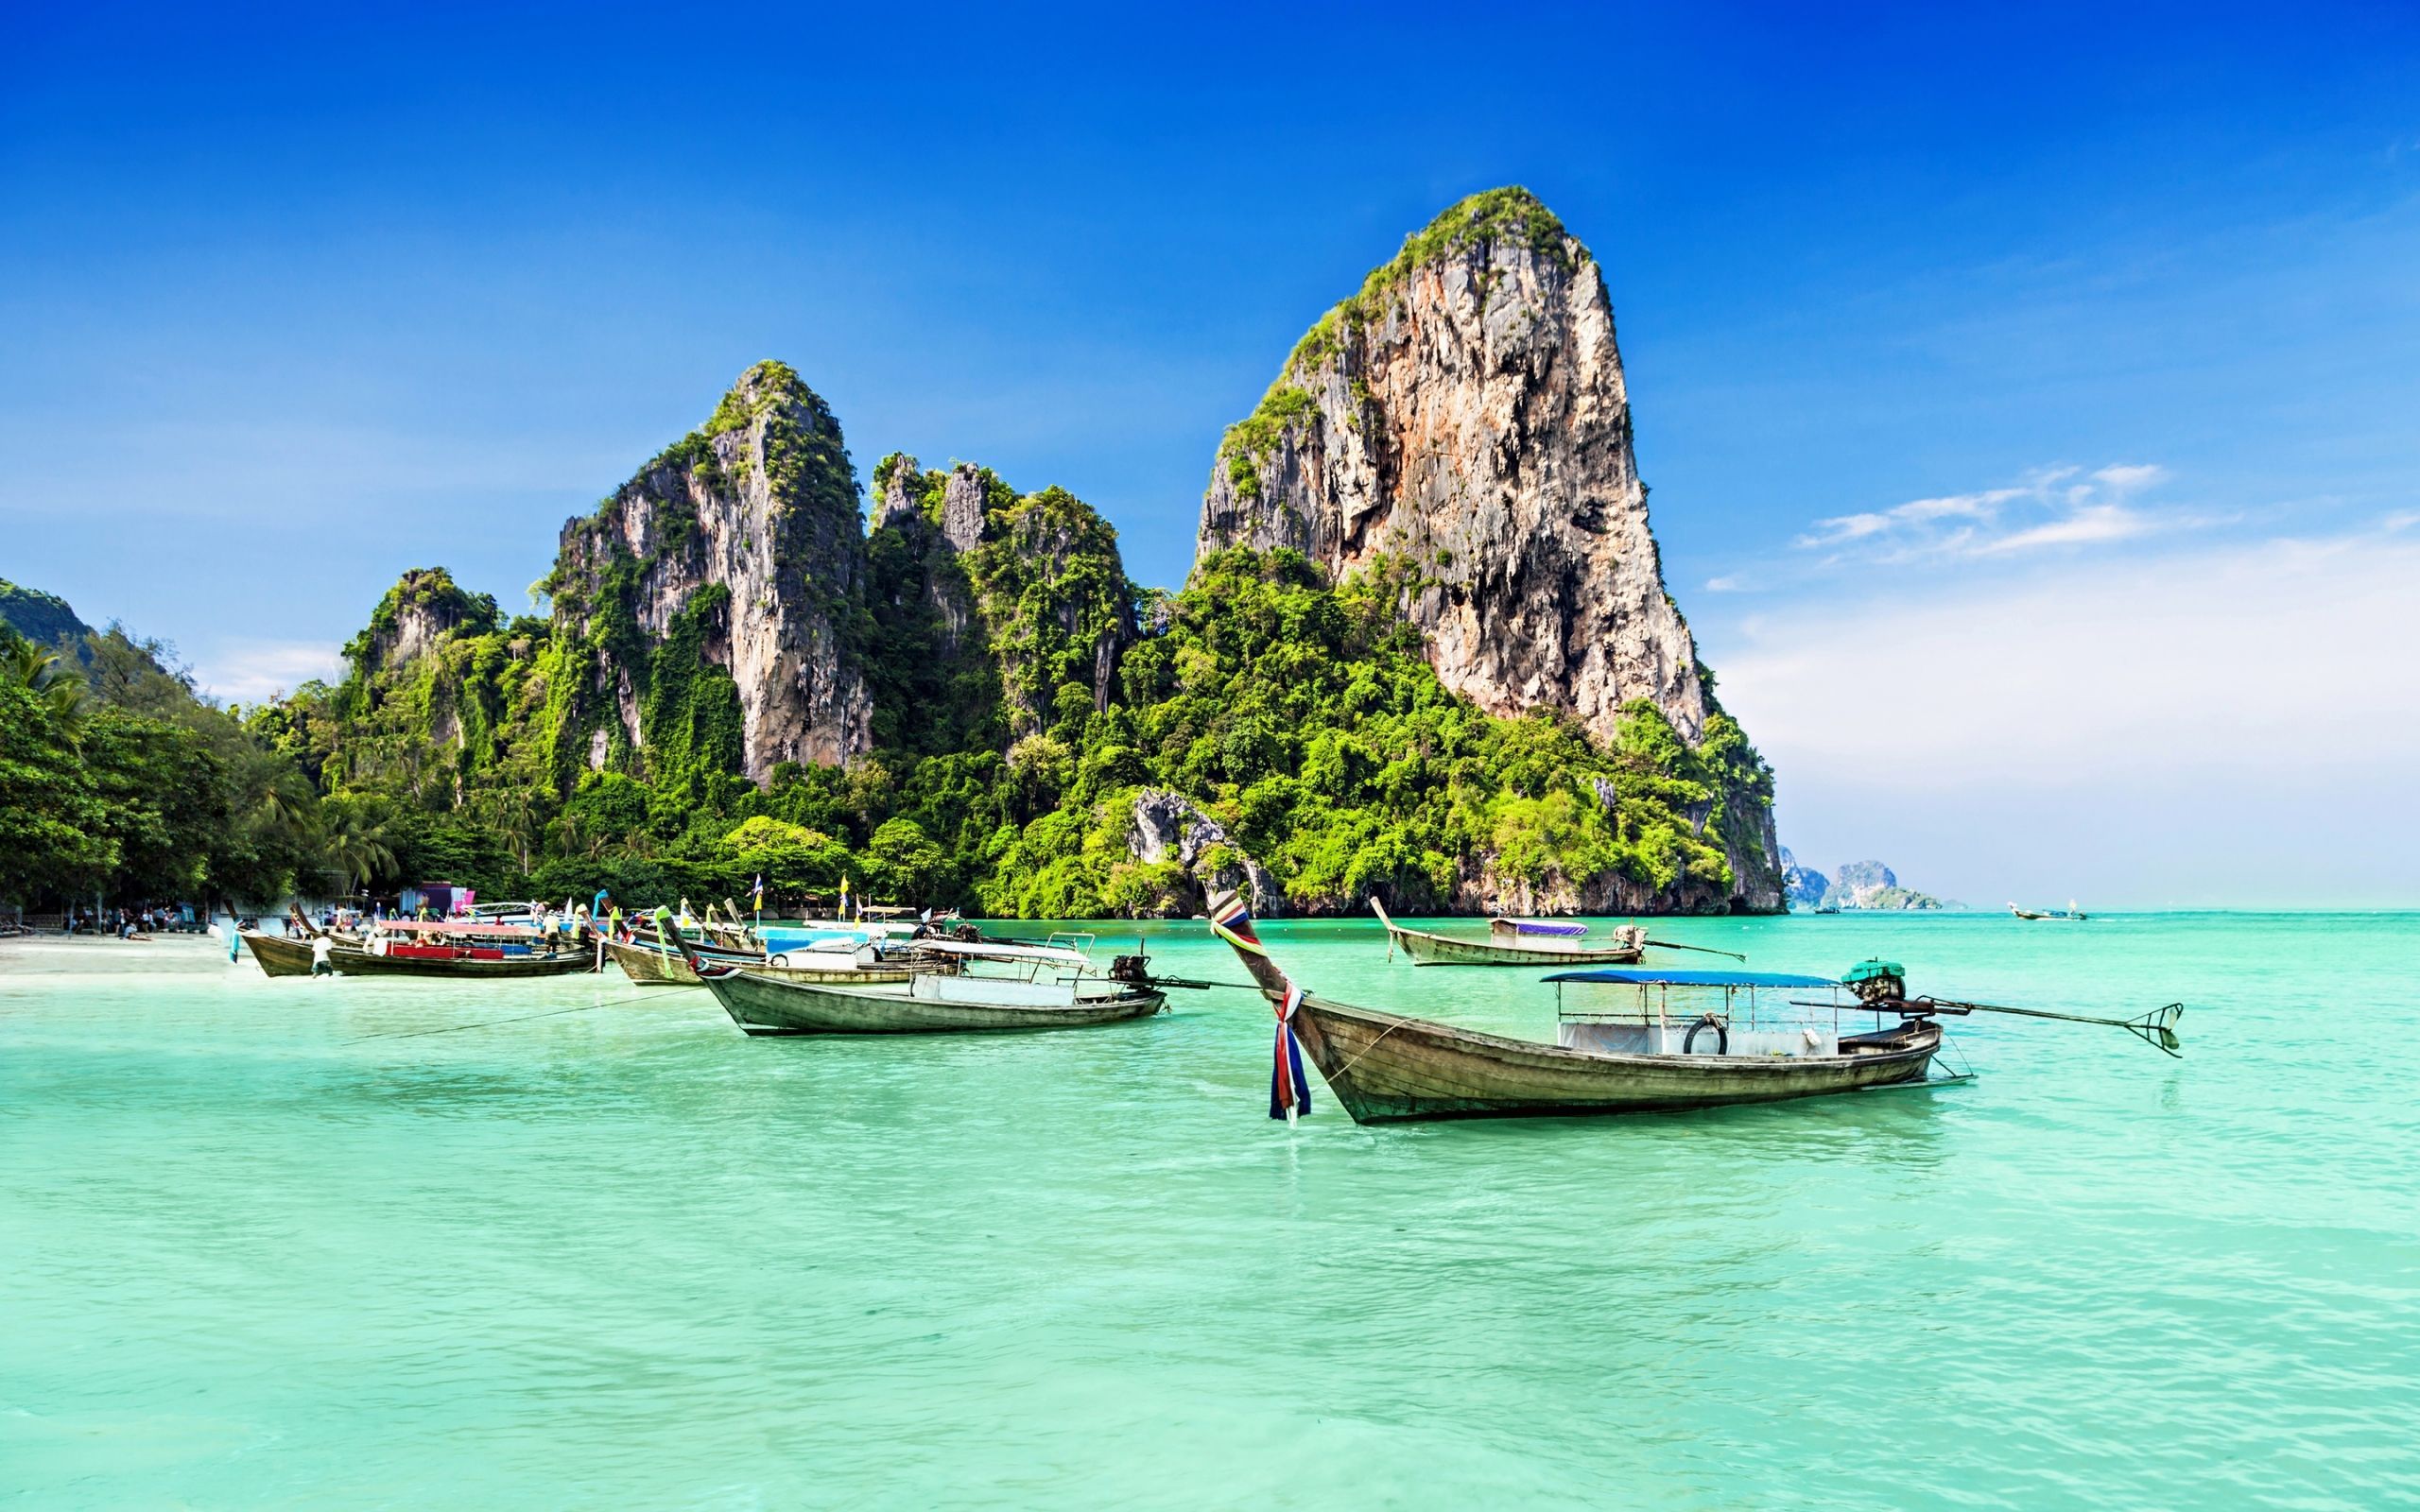 20 Thailand wallpapers HD  Download Free backgrounds